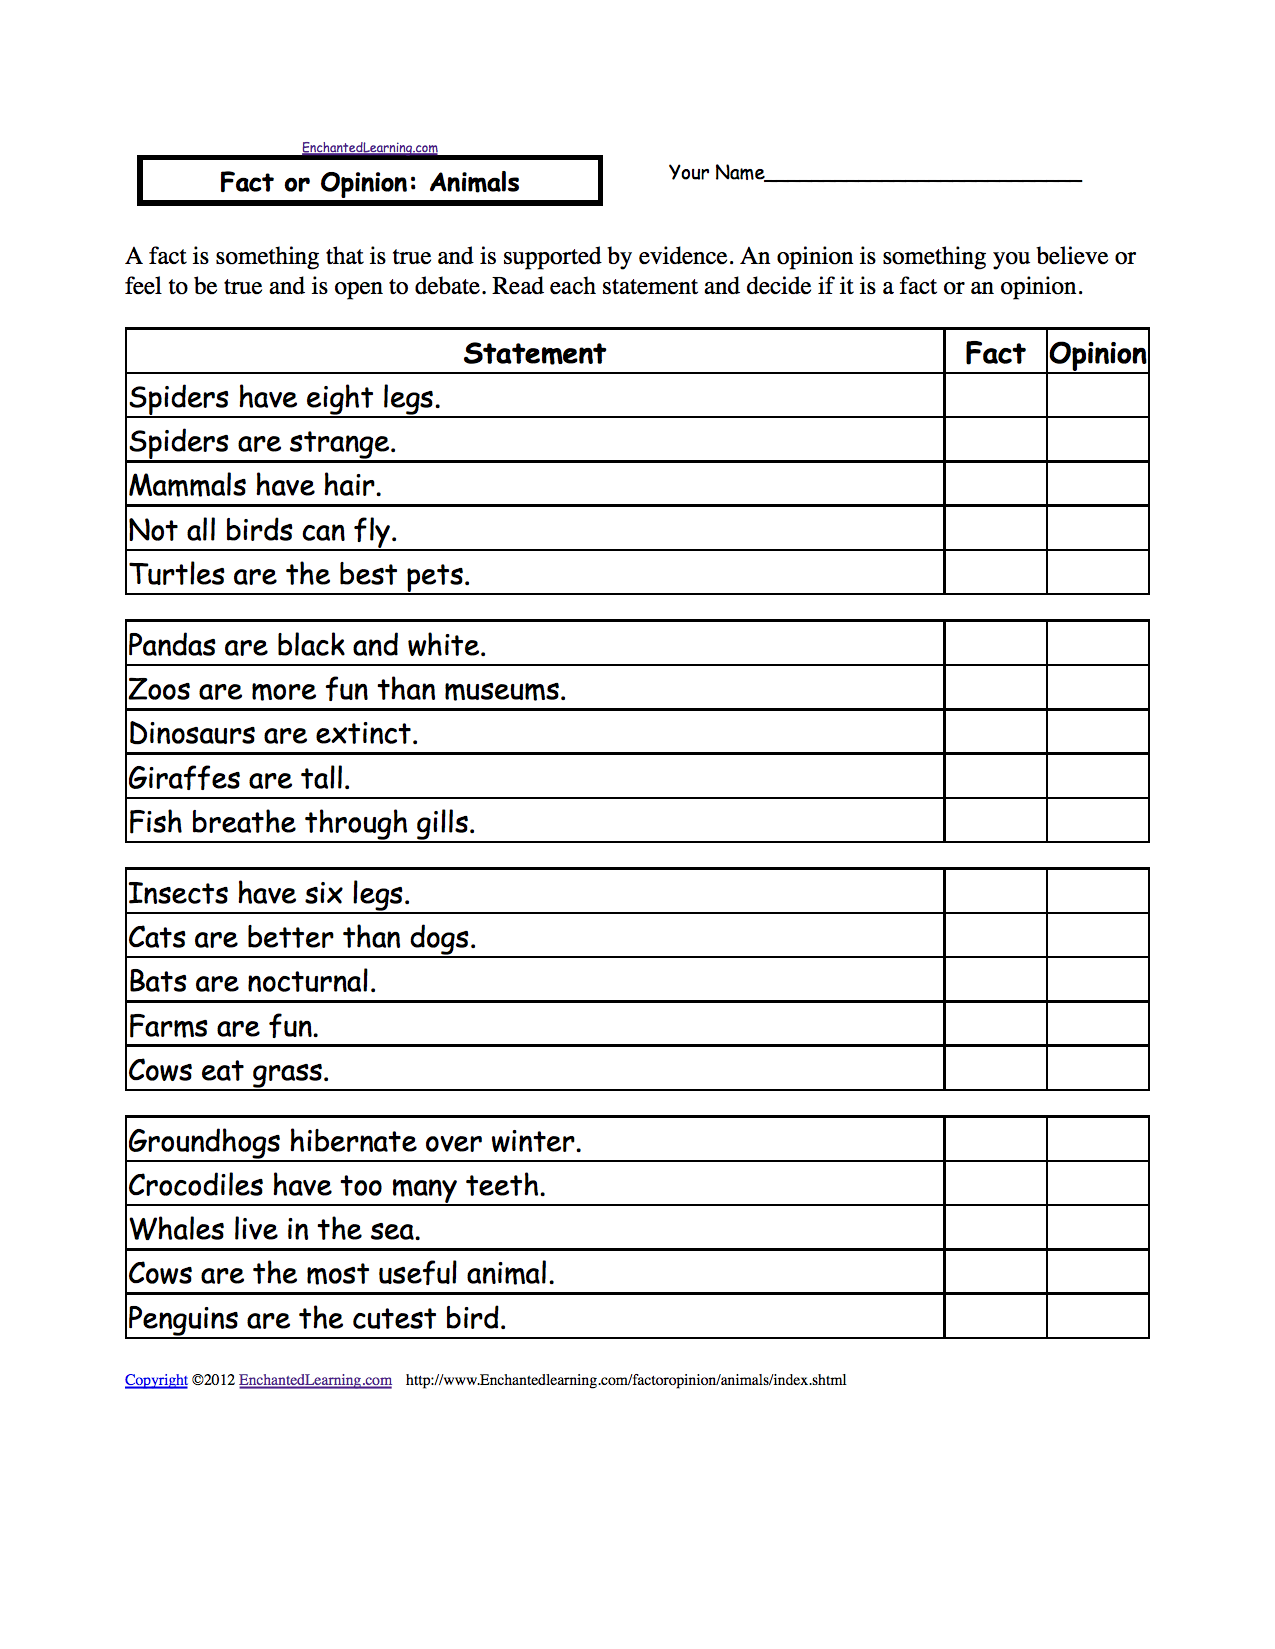 Fact or Opinion? Worksheets to Print - EnchantedLearning.com Throughout Fact Or Opinion Worksheet